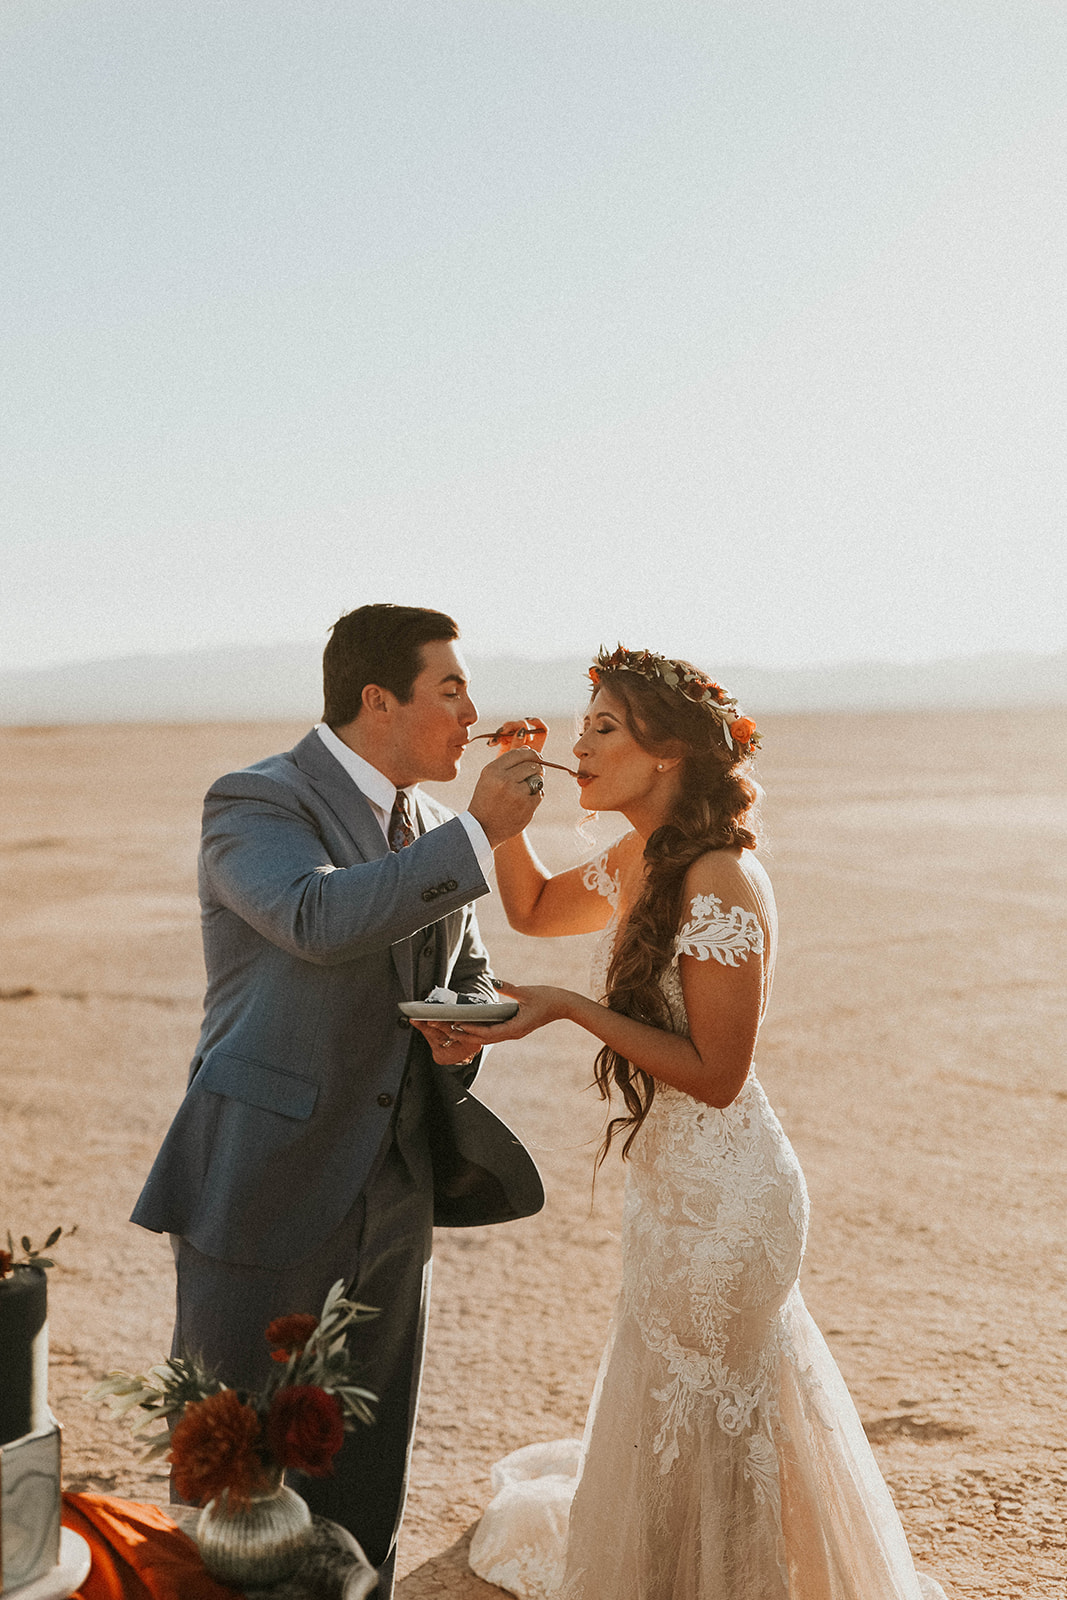 Couple giving each other Cake at Dry Lake Bed Fall Inspired Elopement 